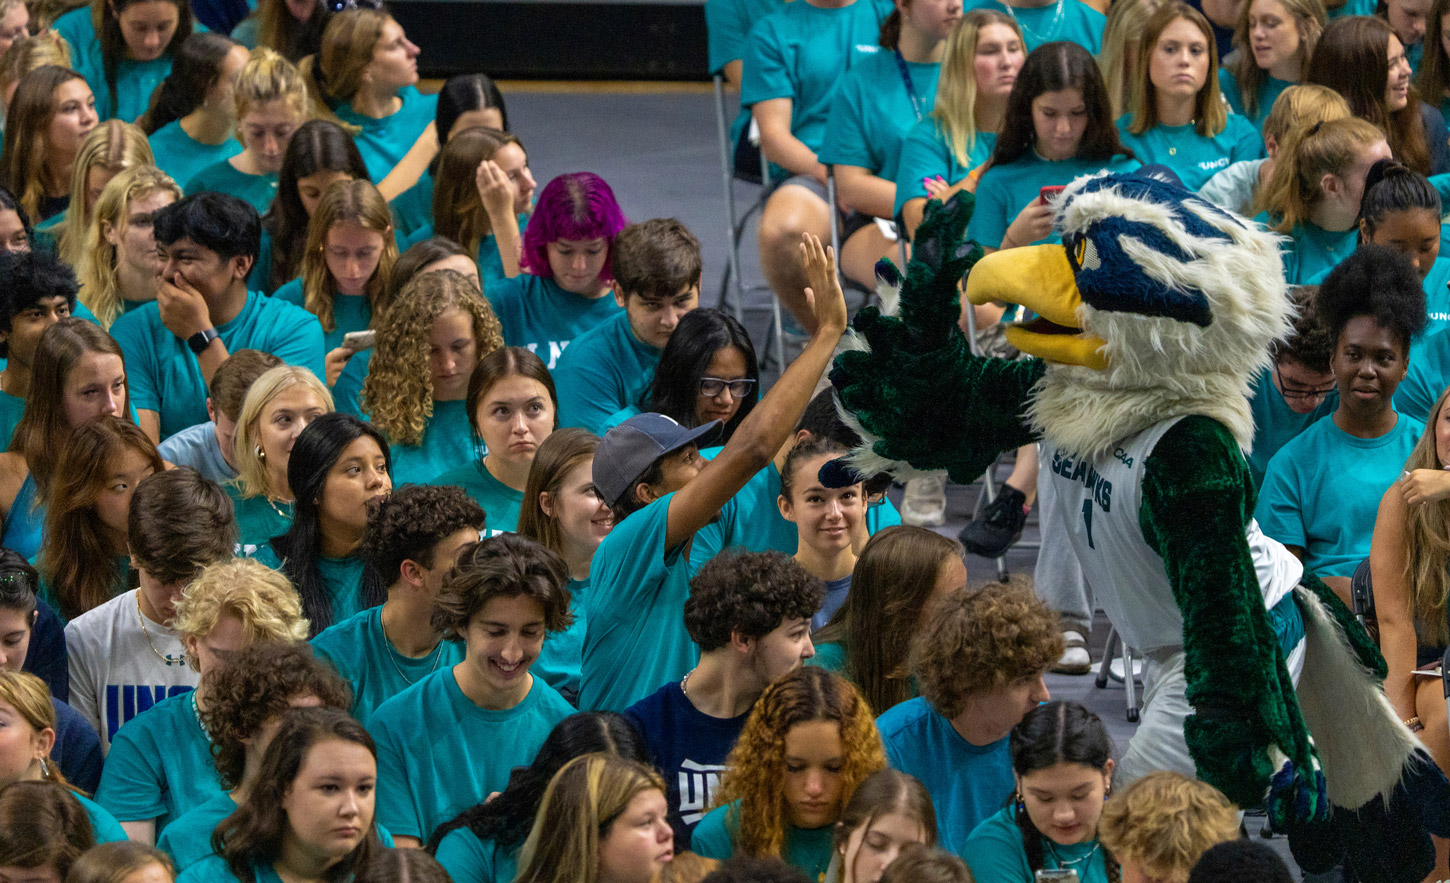 Sammy High Fives a Student at Convocation